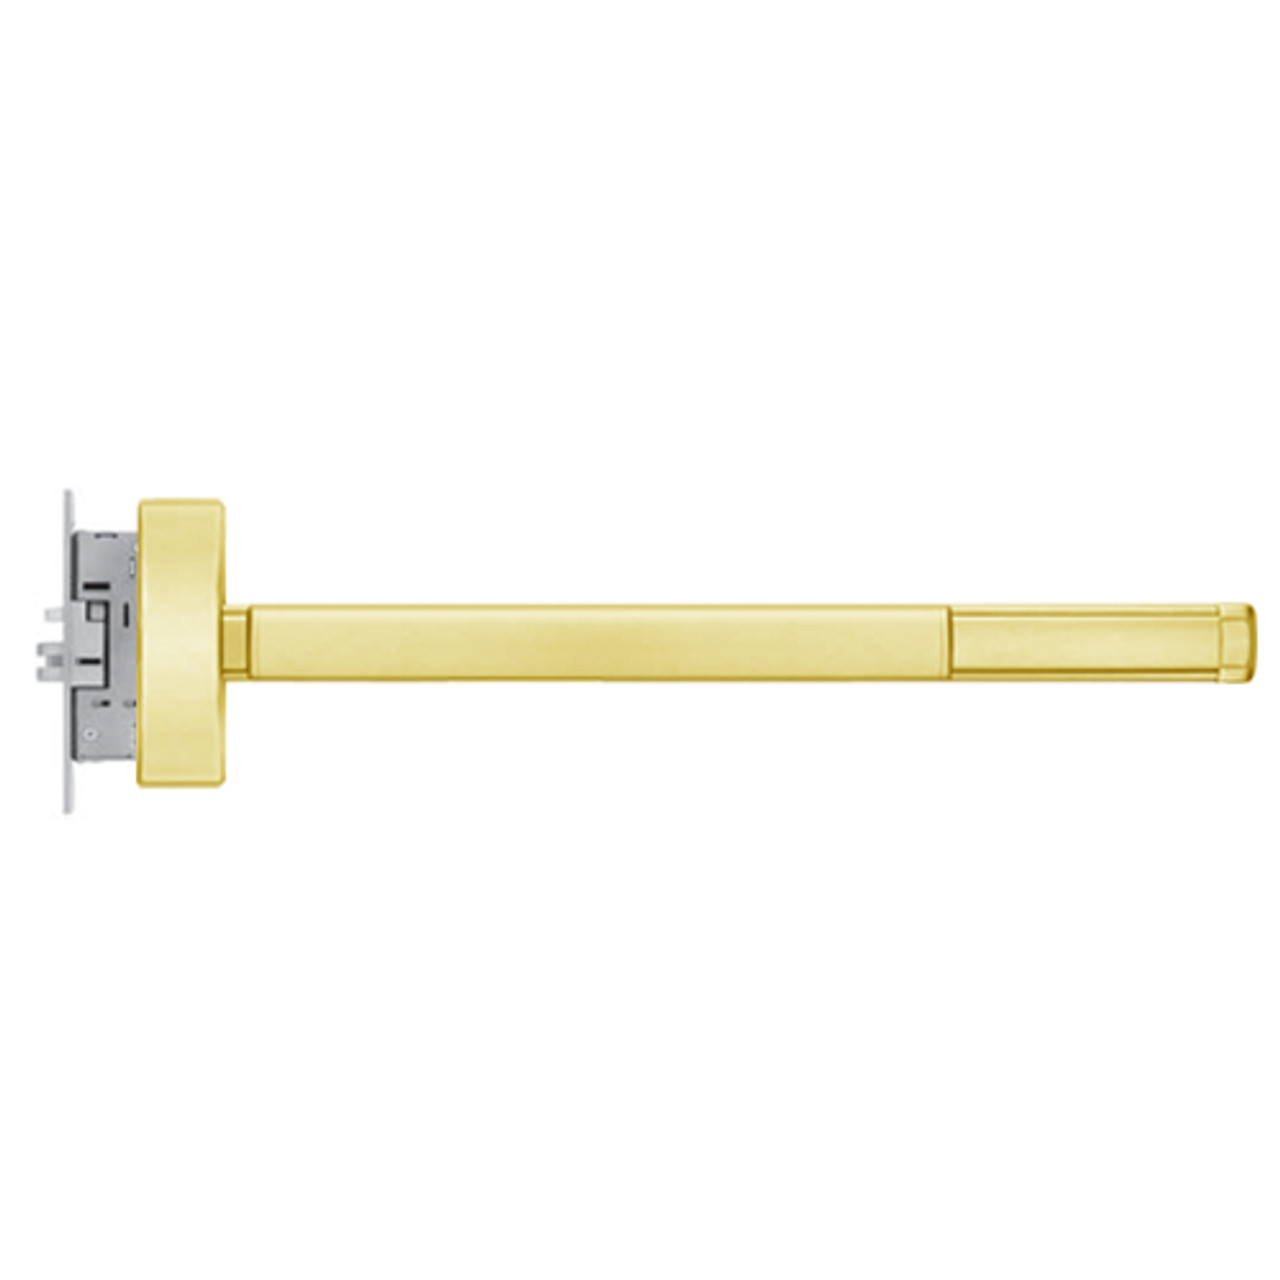 TSFL2302-RHR-605-36 PHI 2300 Series Fire Rated Apex Mortise Exit Device with Touchbar Monitoring Switch Prepped for Dummy Trim in Bright Brass Finish